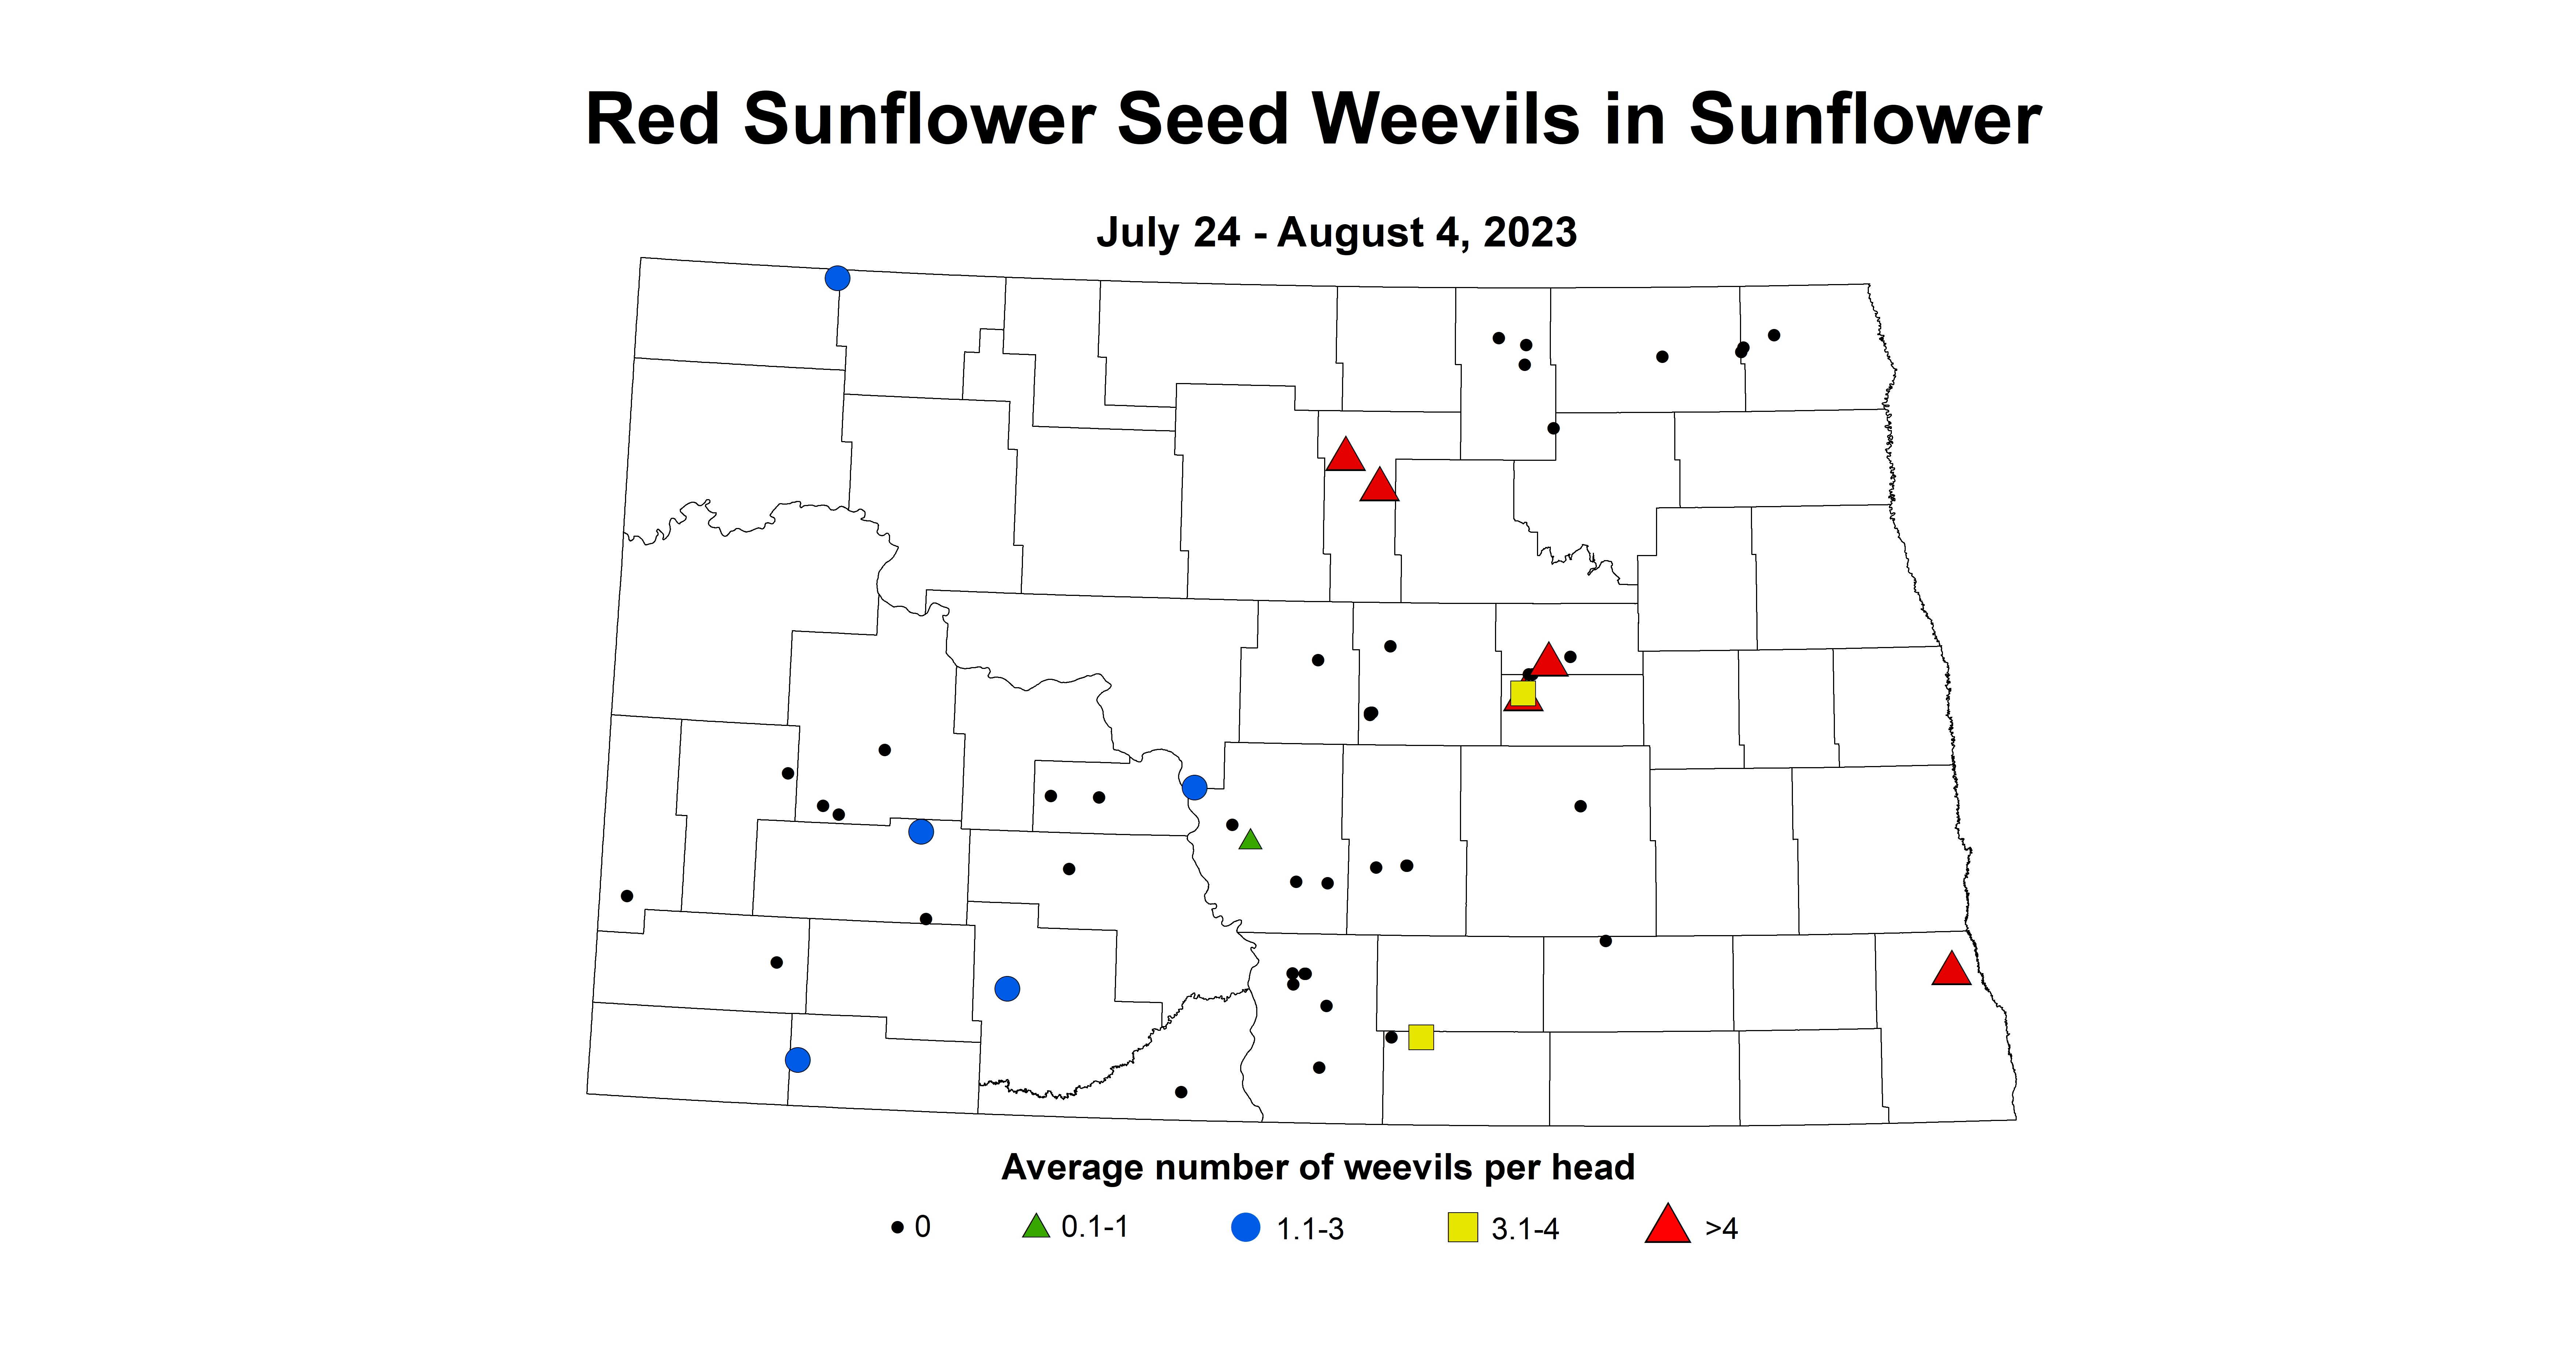 red sunflower seed weevils 7.24-8.4 2023